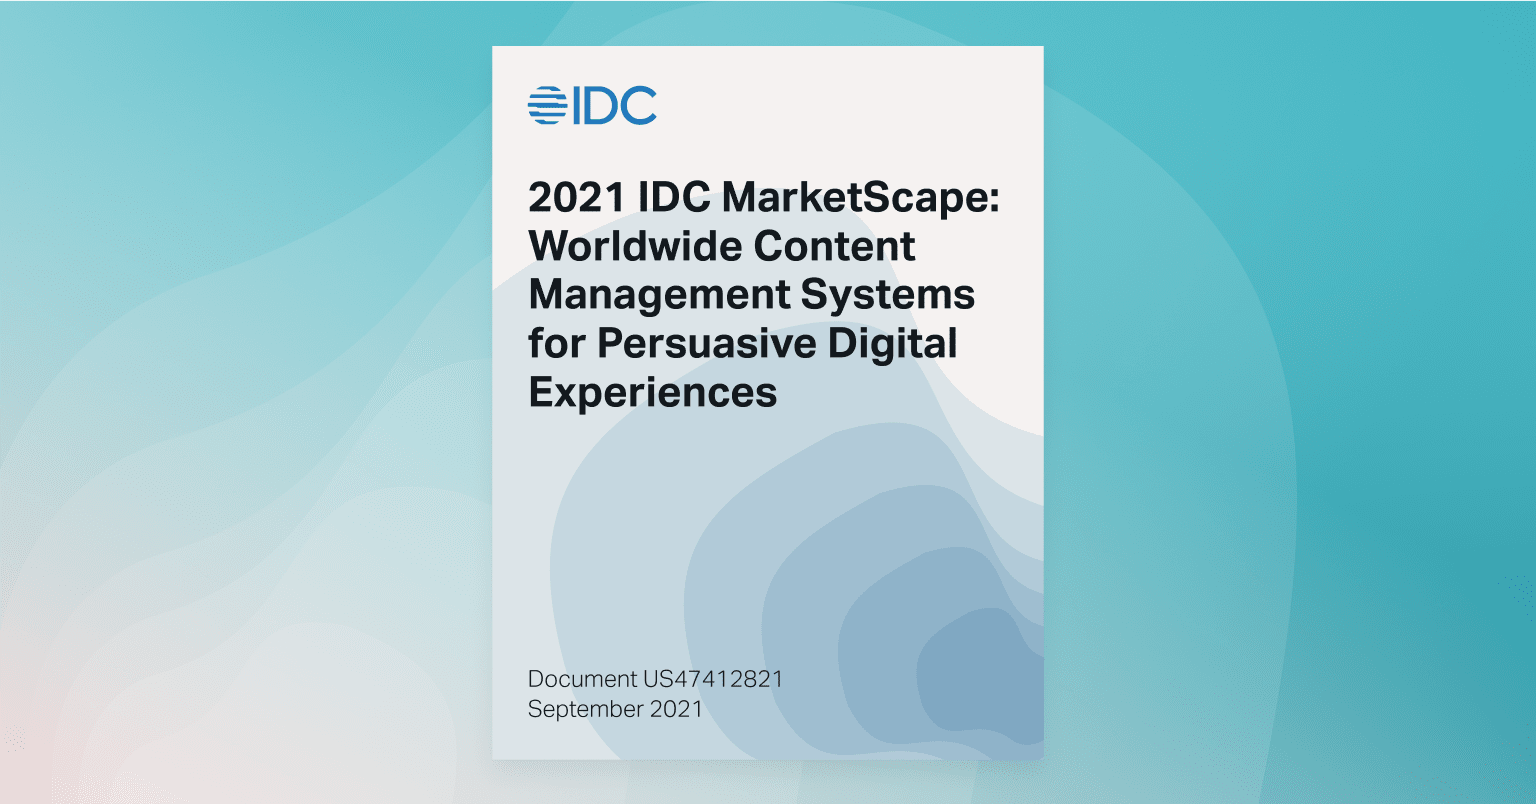 Automattic named a Leader in 2021 IDC MarketScape: Worldwide Content Management Systems for Persuasive Digital Experiences